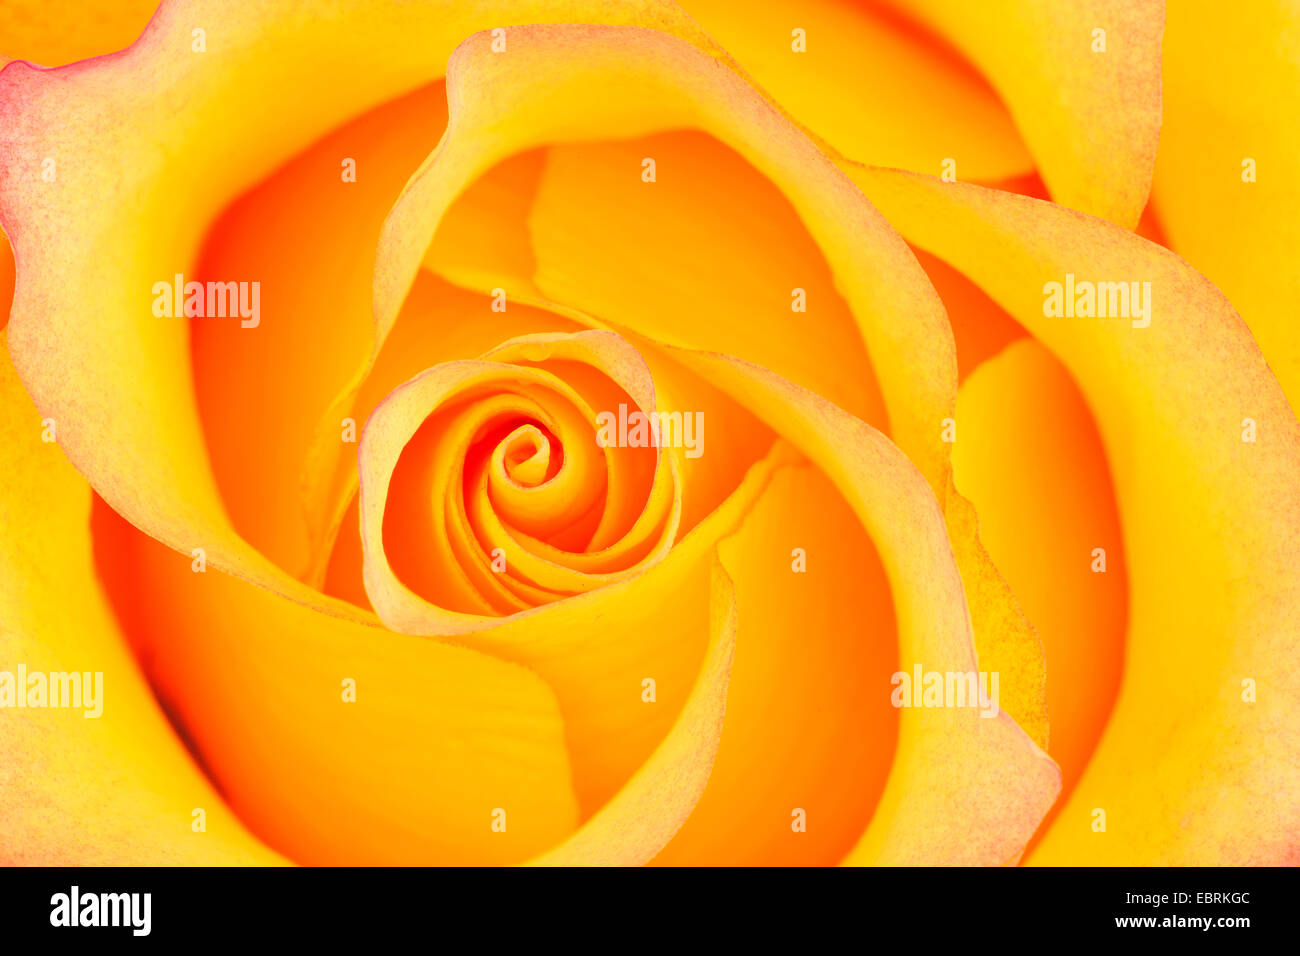 ornamental rose (Rosa spec.), detail of a yellow rose Stock Photo